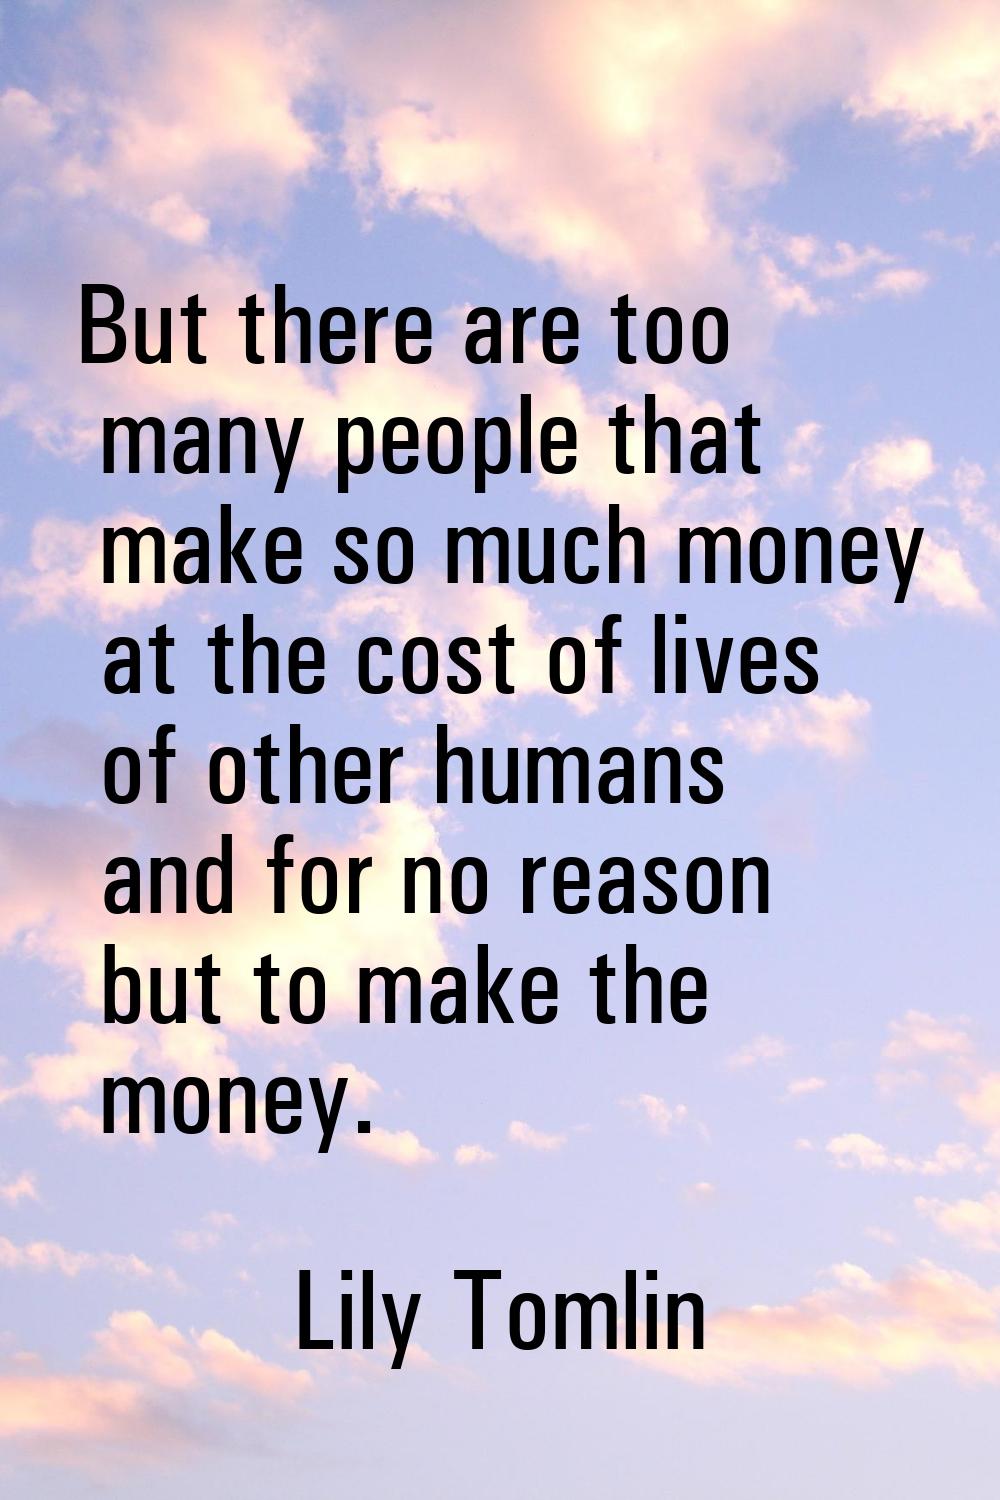 But there are too many people that make so much money at the cost of lives of other humans and for 